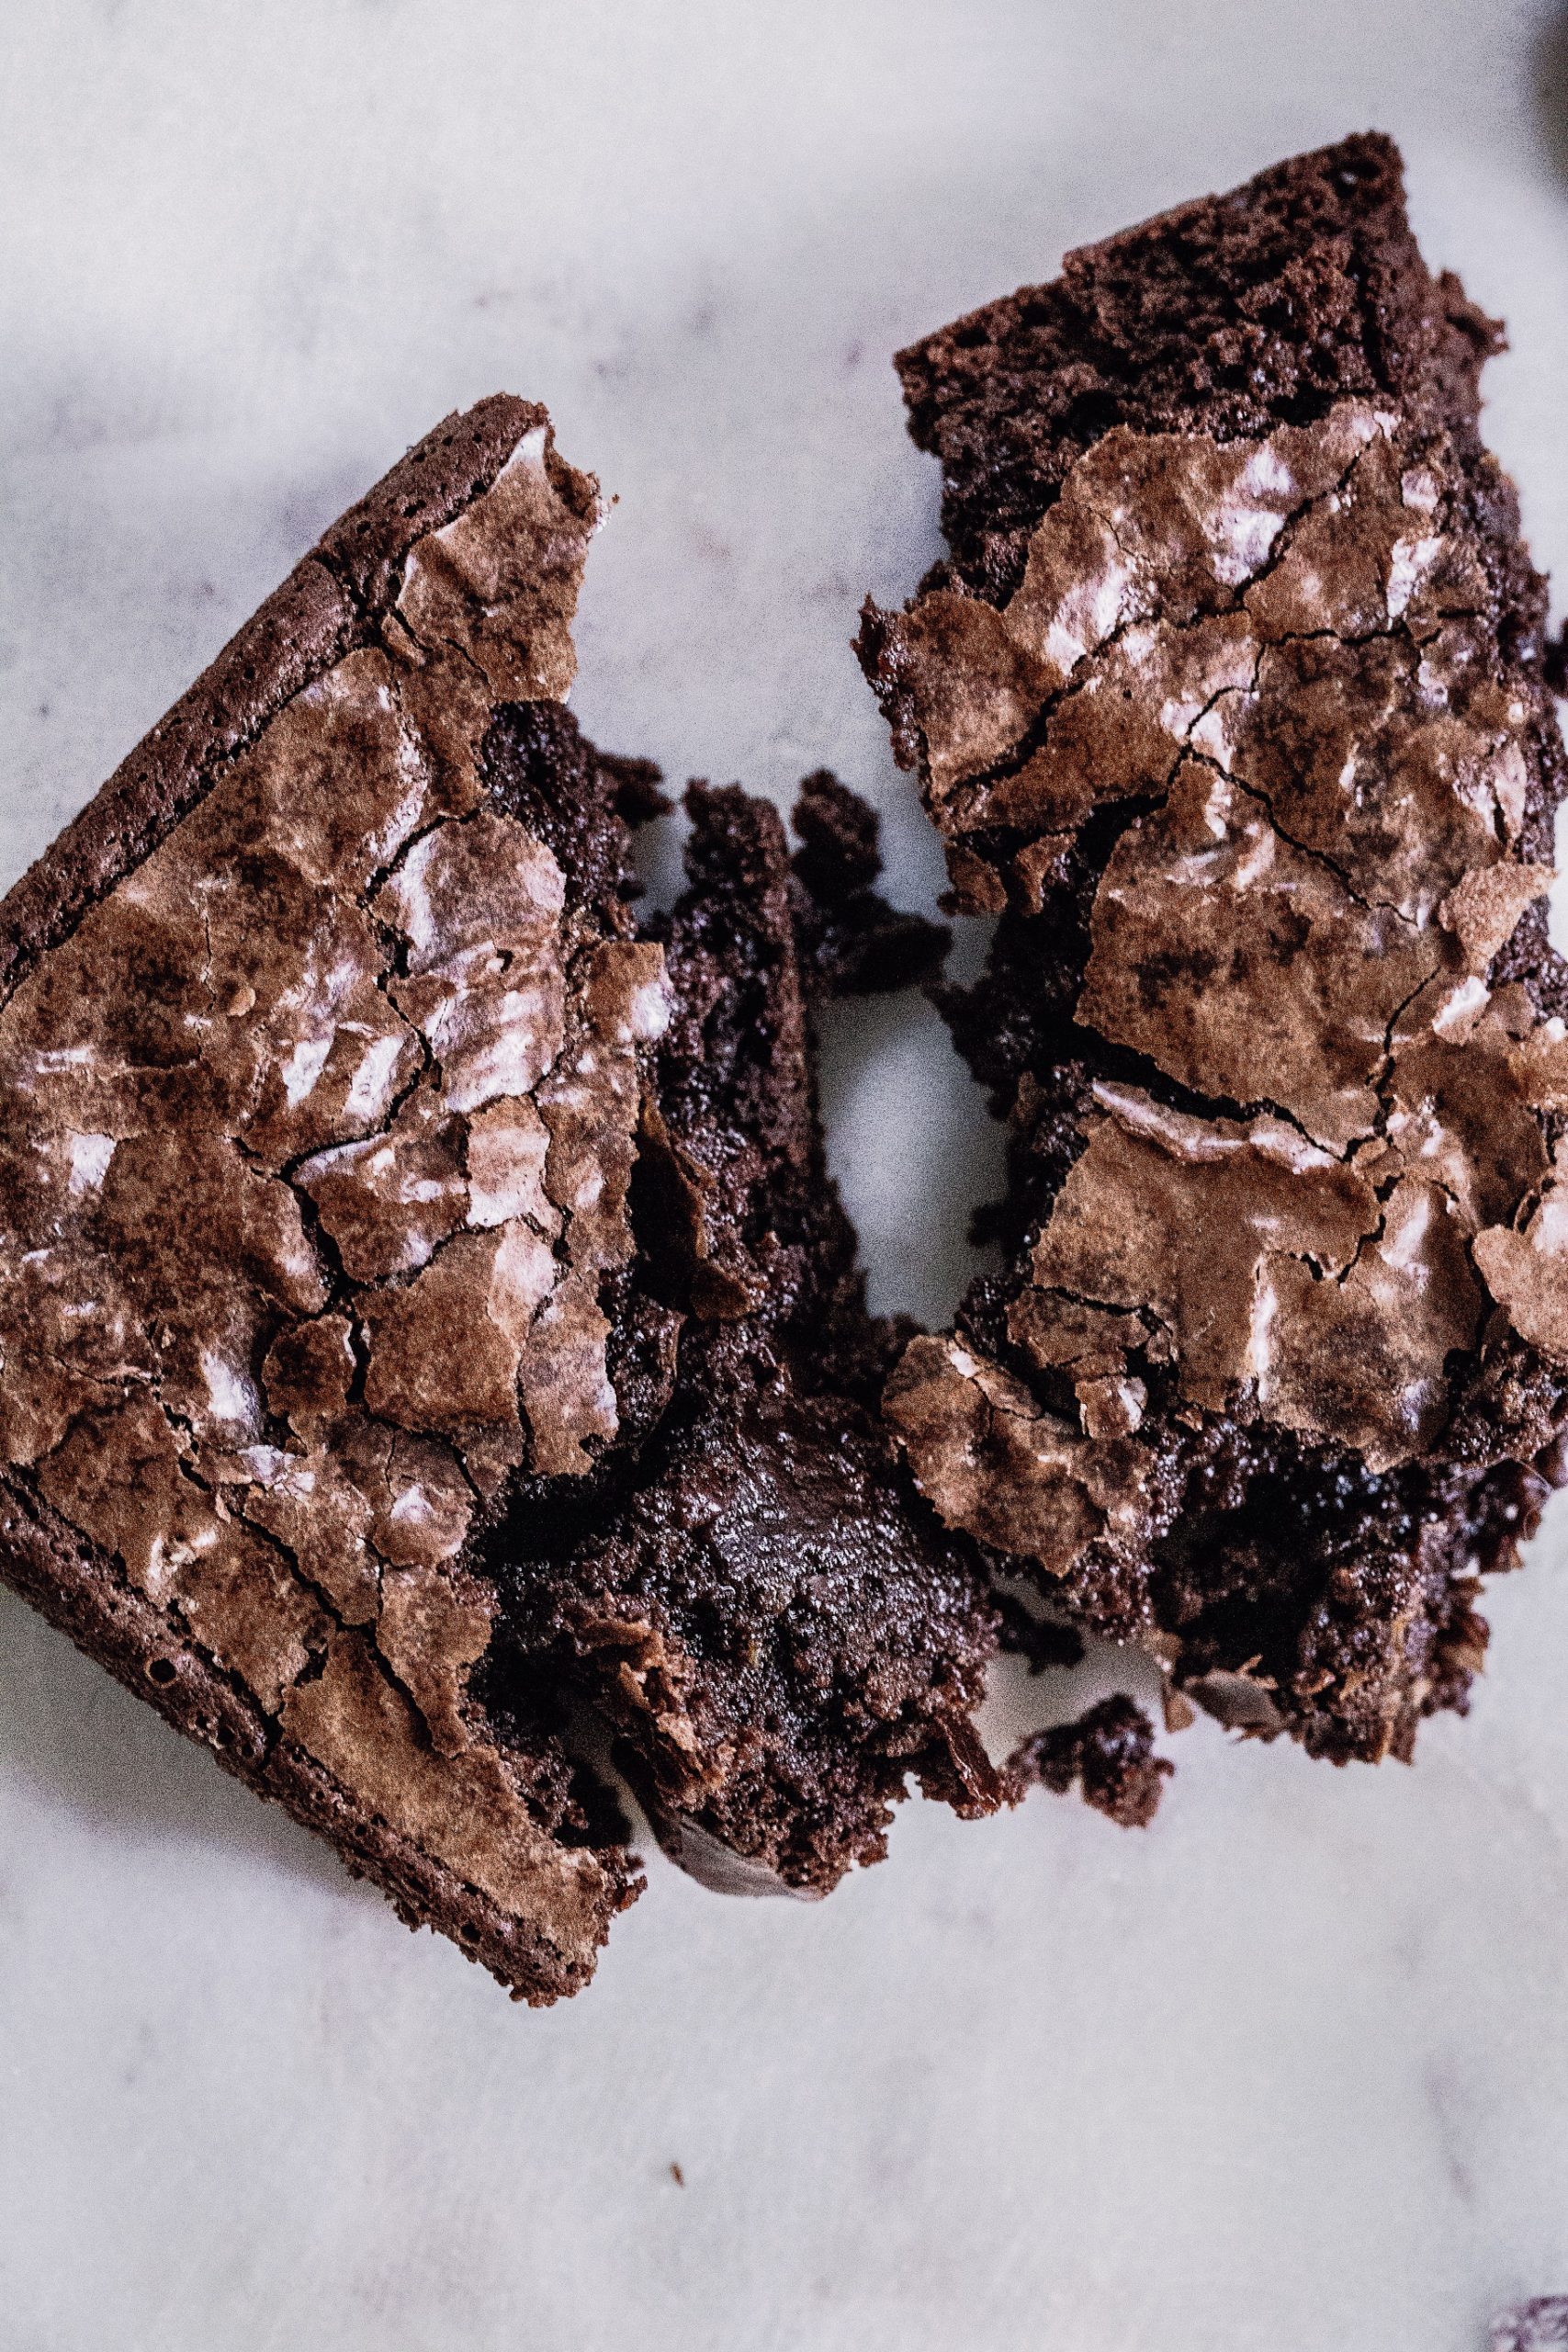 https://mykitchenlittle.com/wp-content/uploads/2020/05/Brownies-4-scaled.jpeg